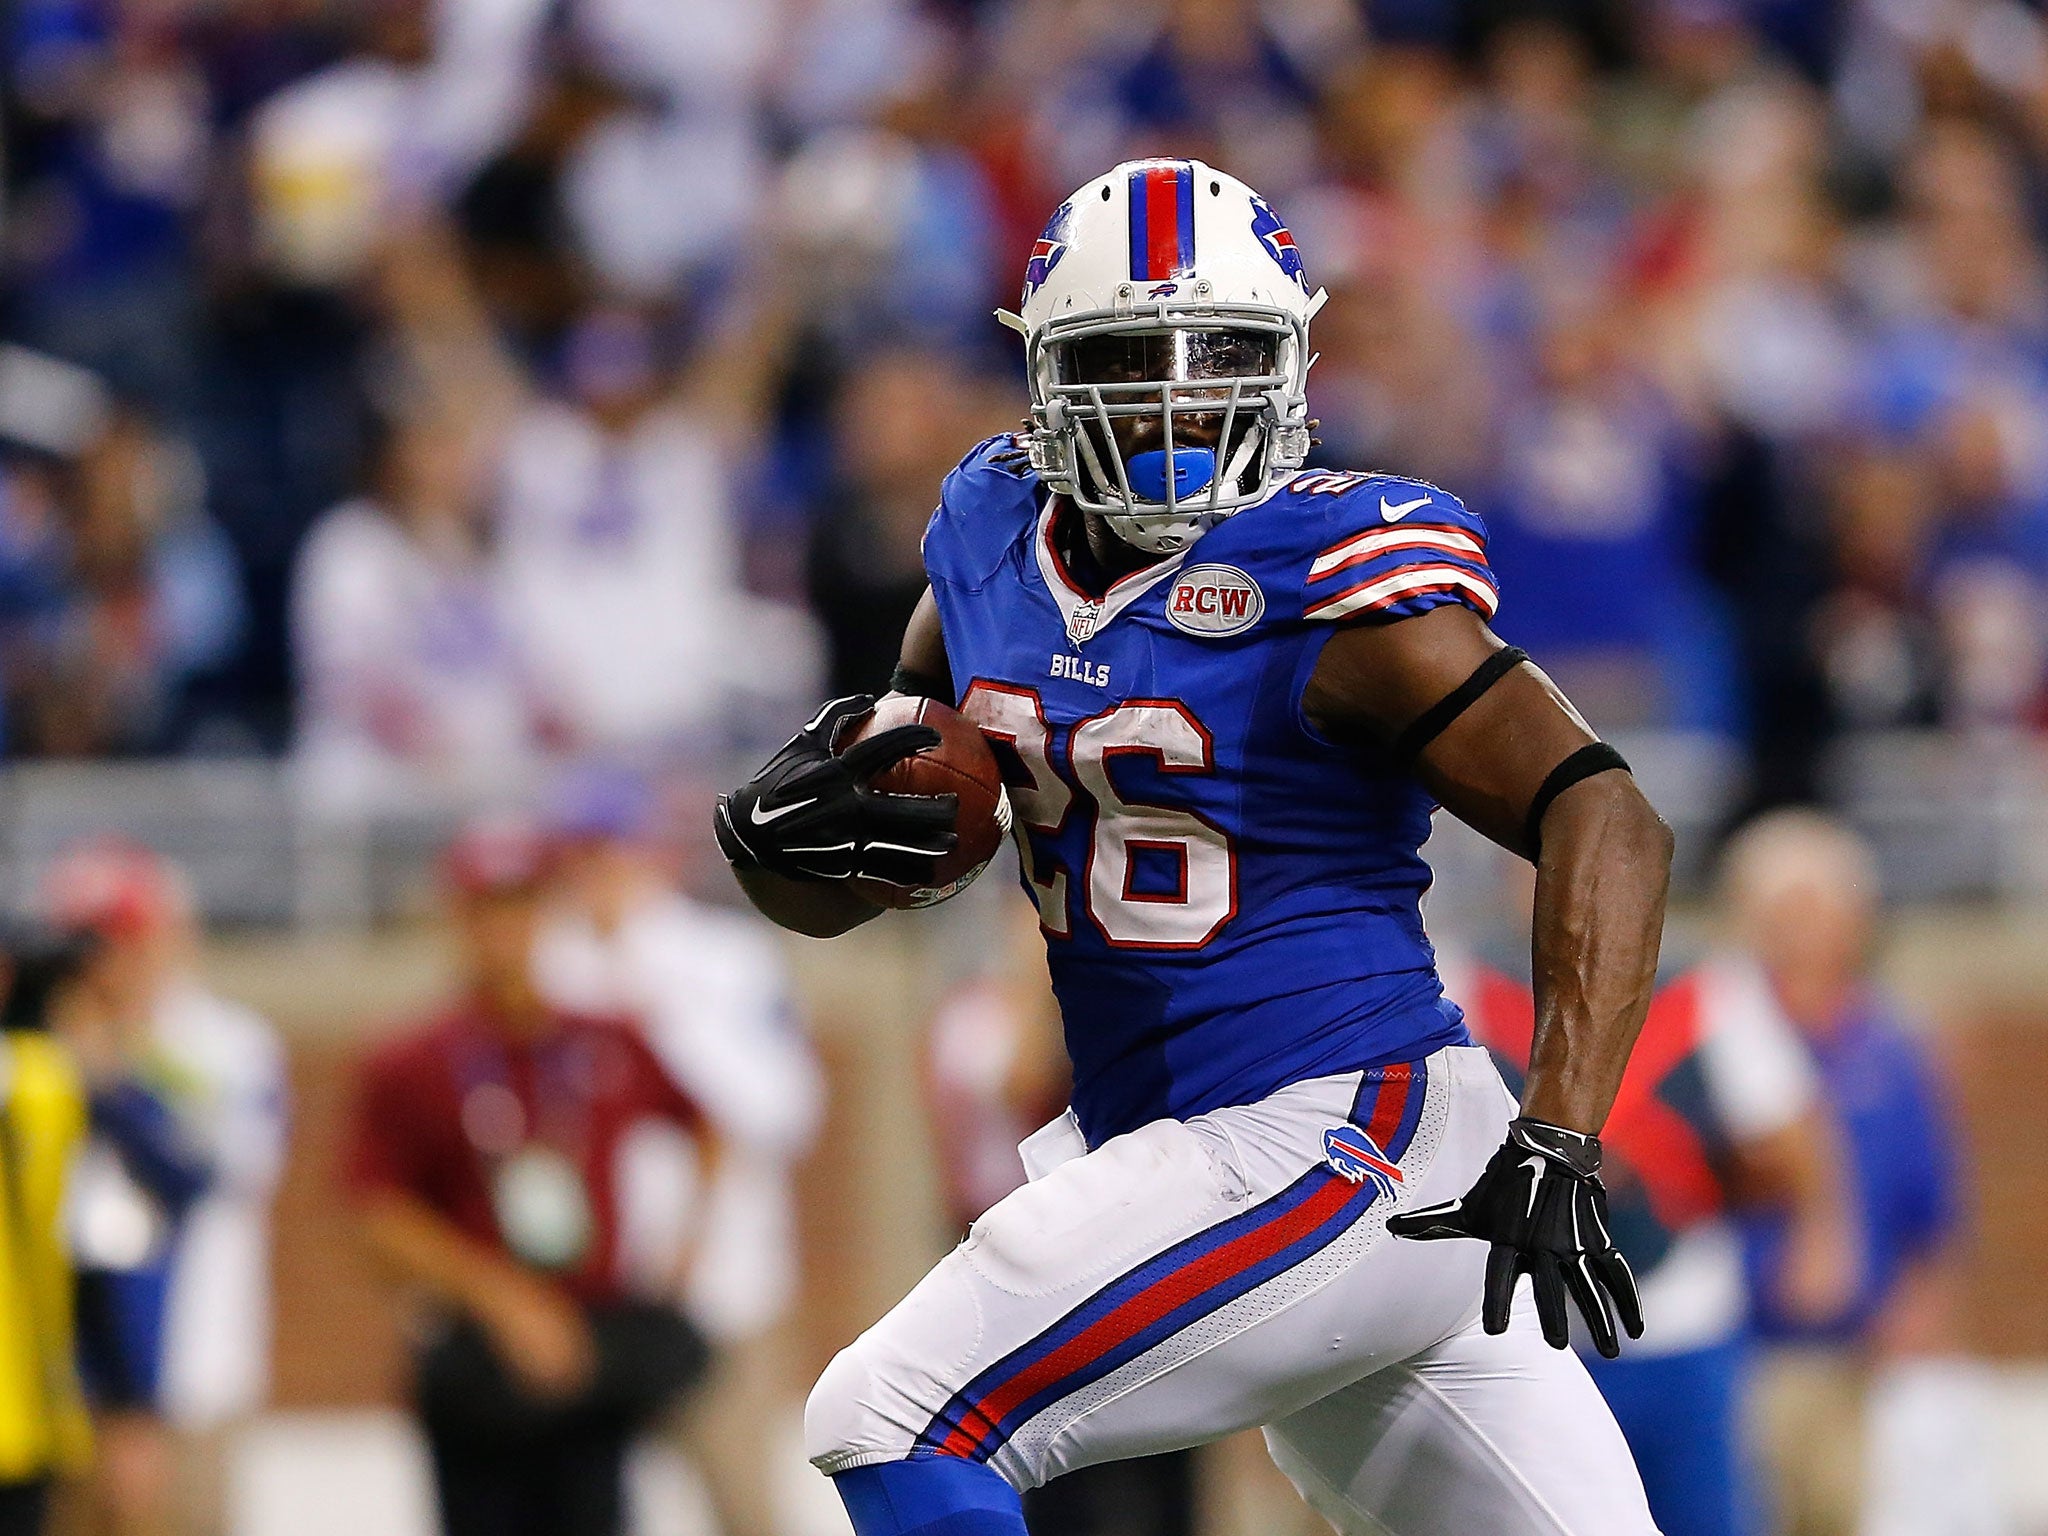 Anthony Dixon runs in a 30-yards touchdown for the Bills